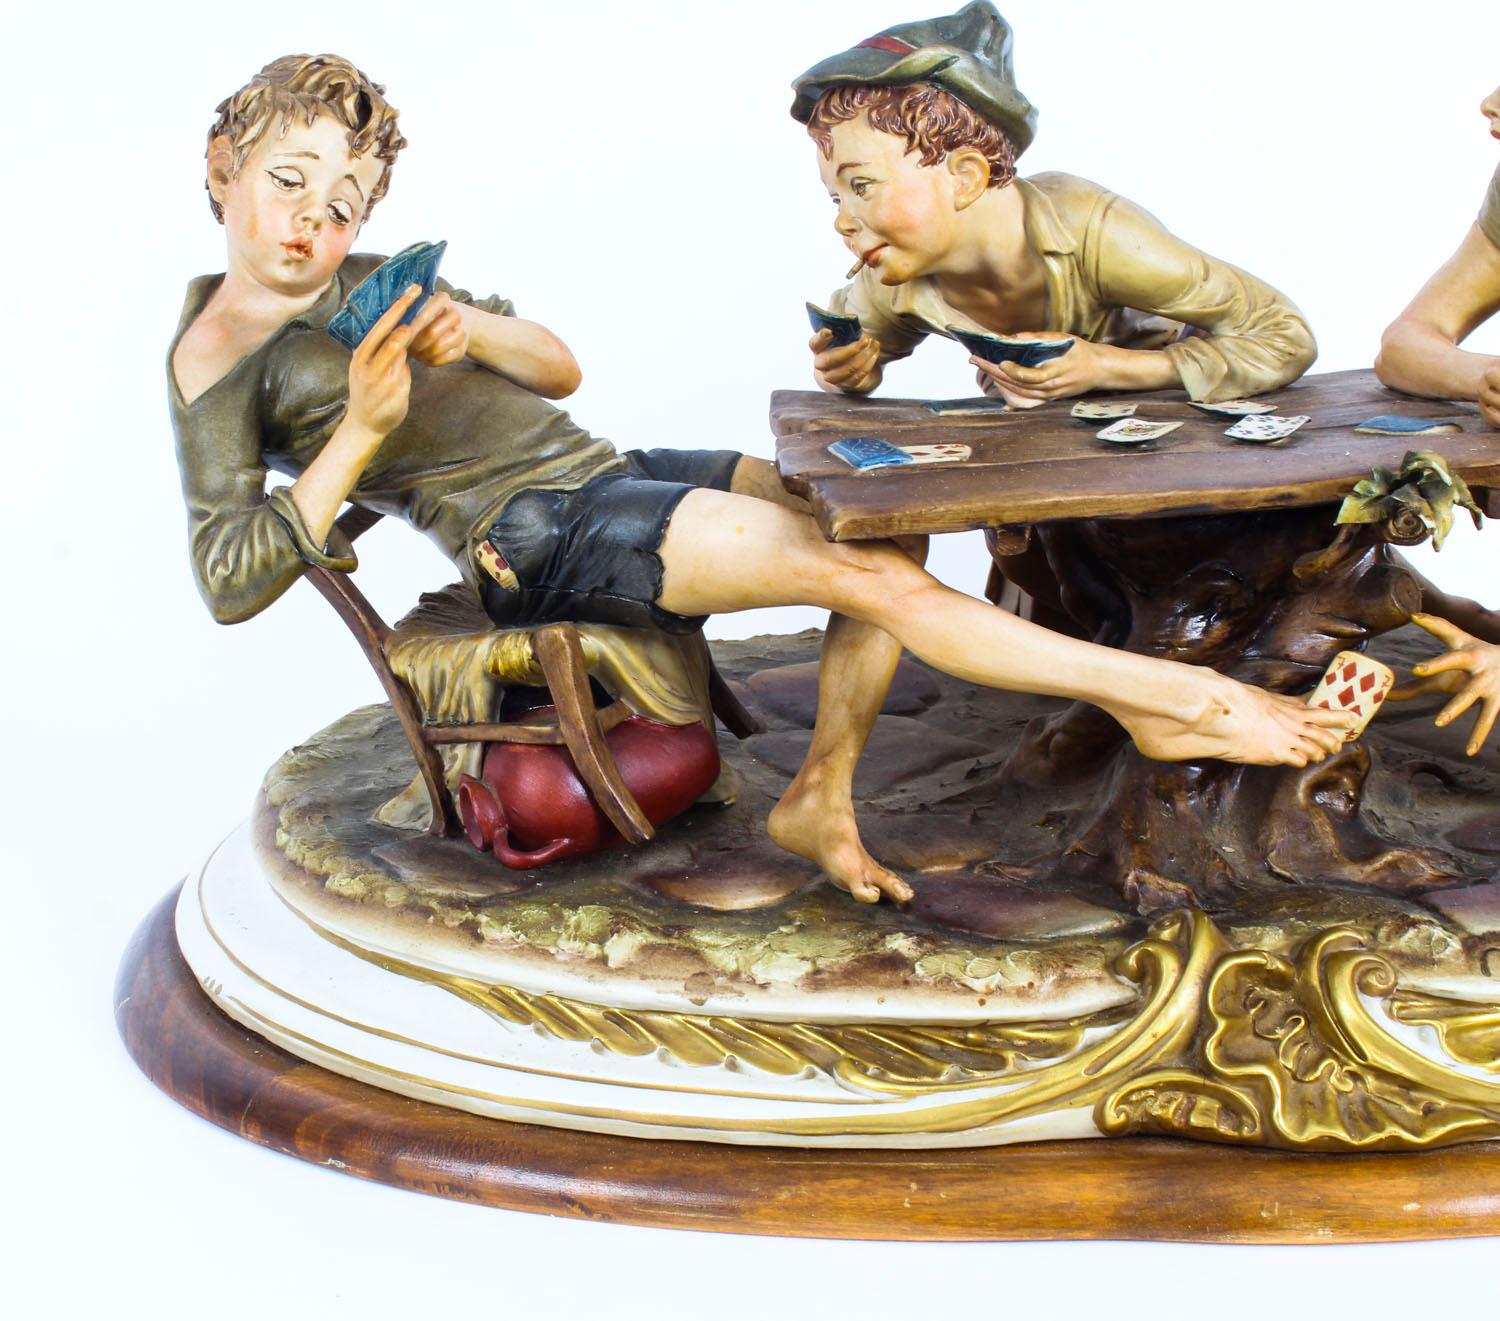 This is a large impressive vintage Italian Capodimonte porcelain figural group sculpture of, 'The Card Cheats' by Bruno Merli, late 20th Century in date.

The expertly sculpted figures of boys cheating while playing cards on a tree stump on a